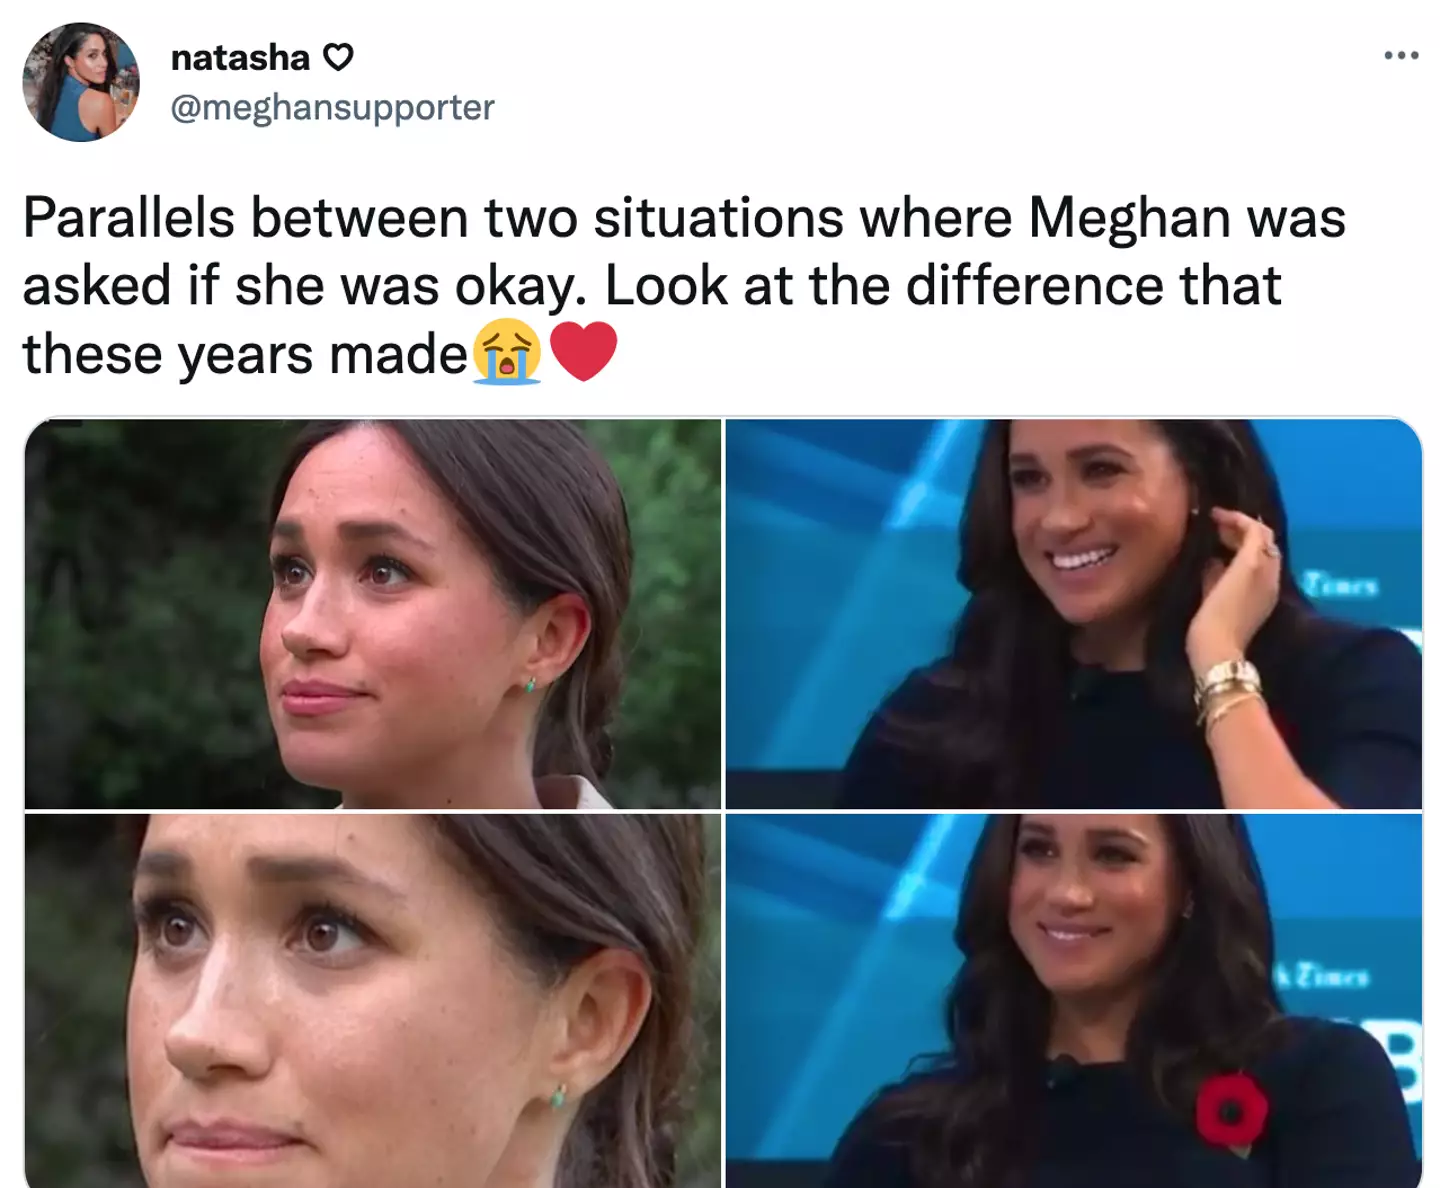 Fans were happy about Meghan's new answer (